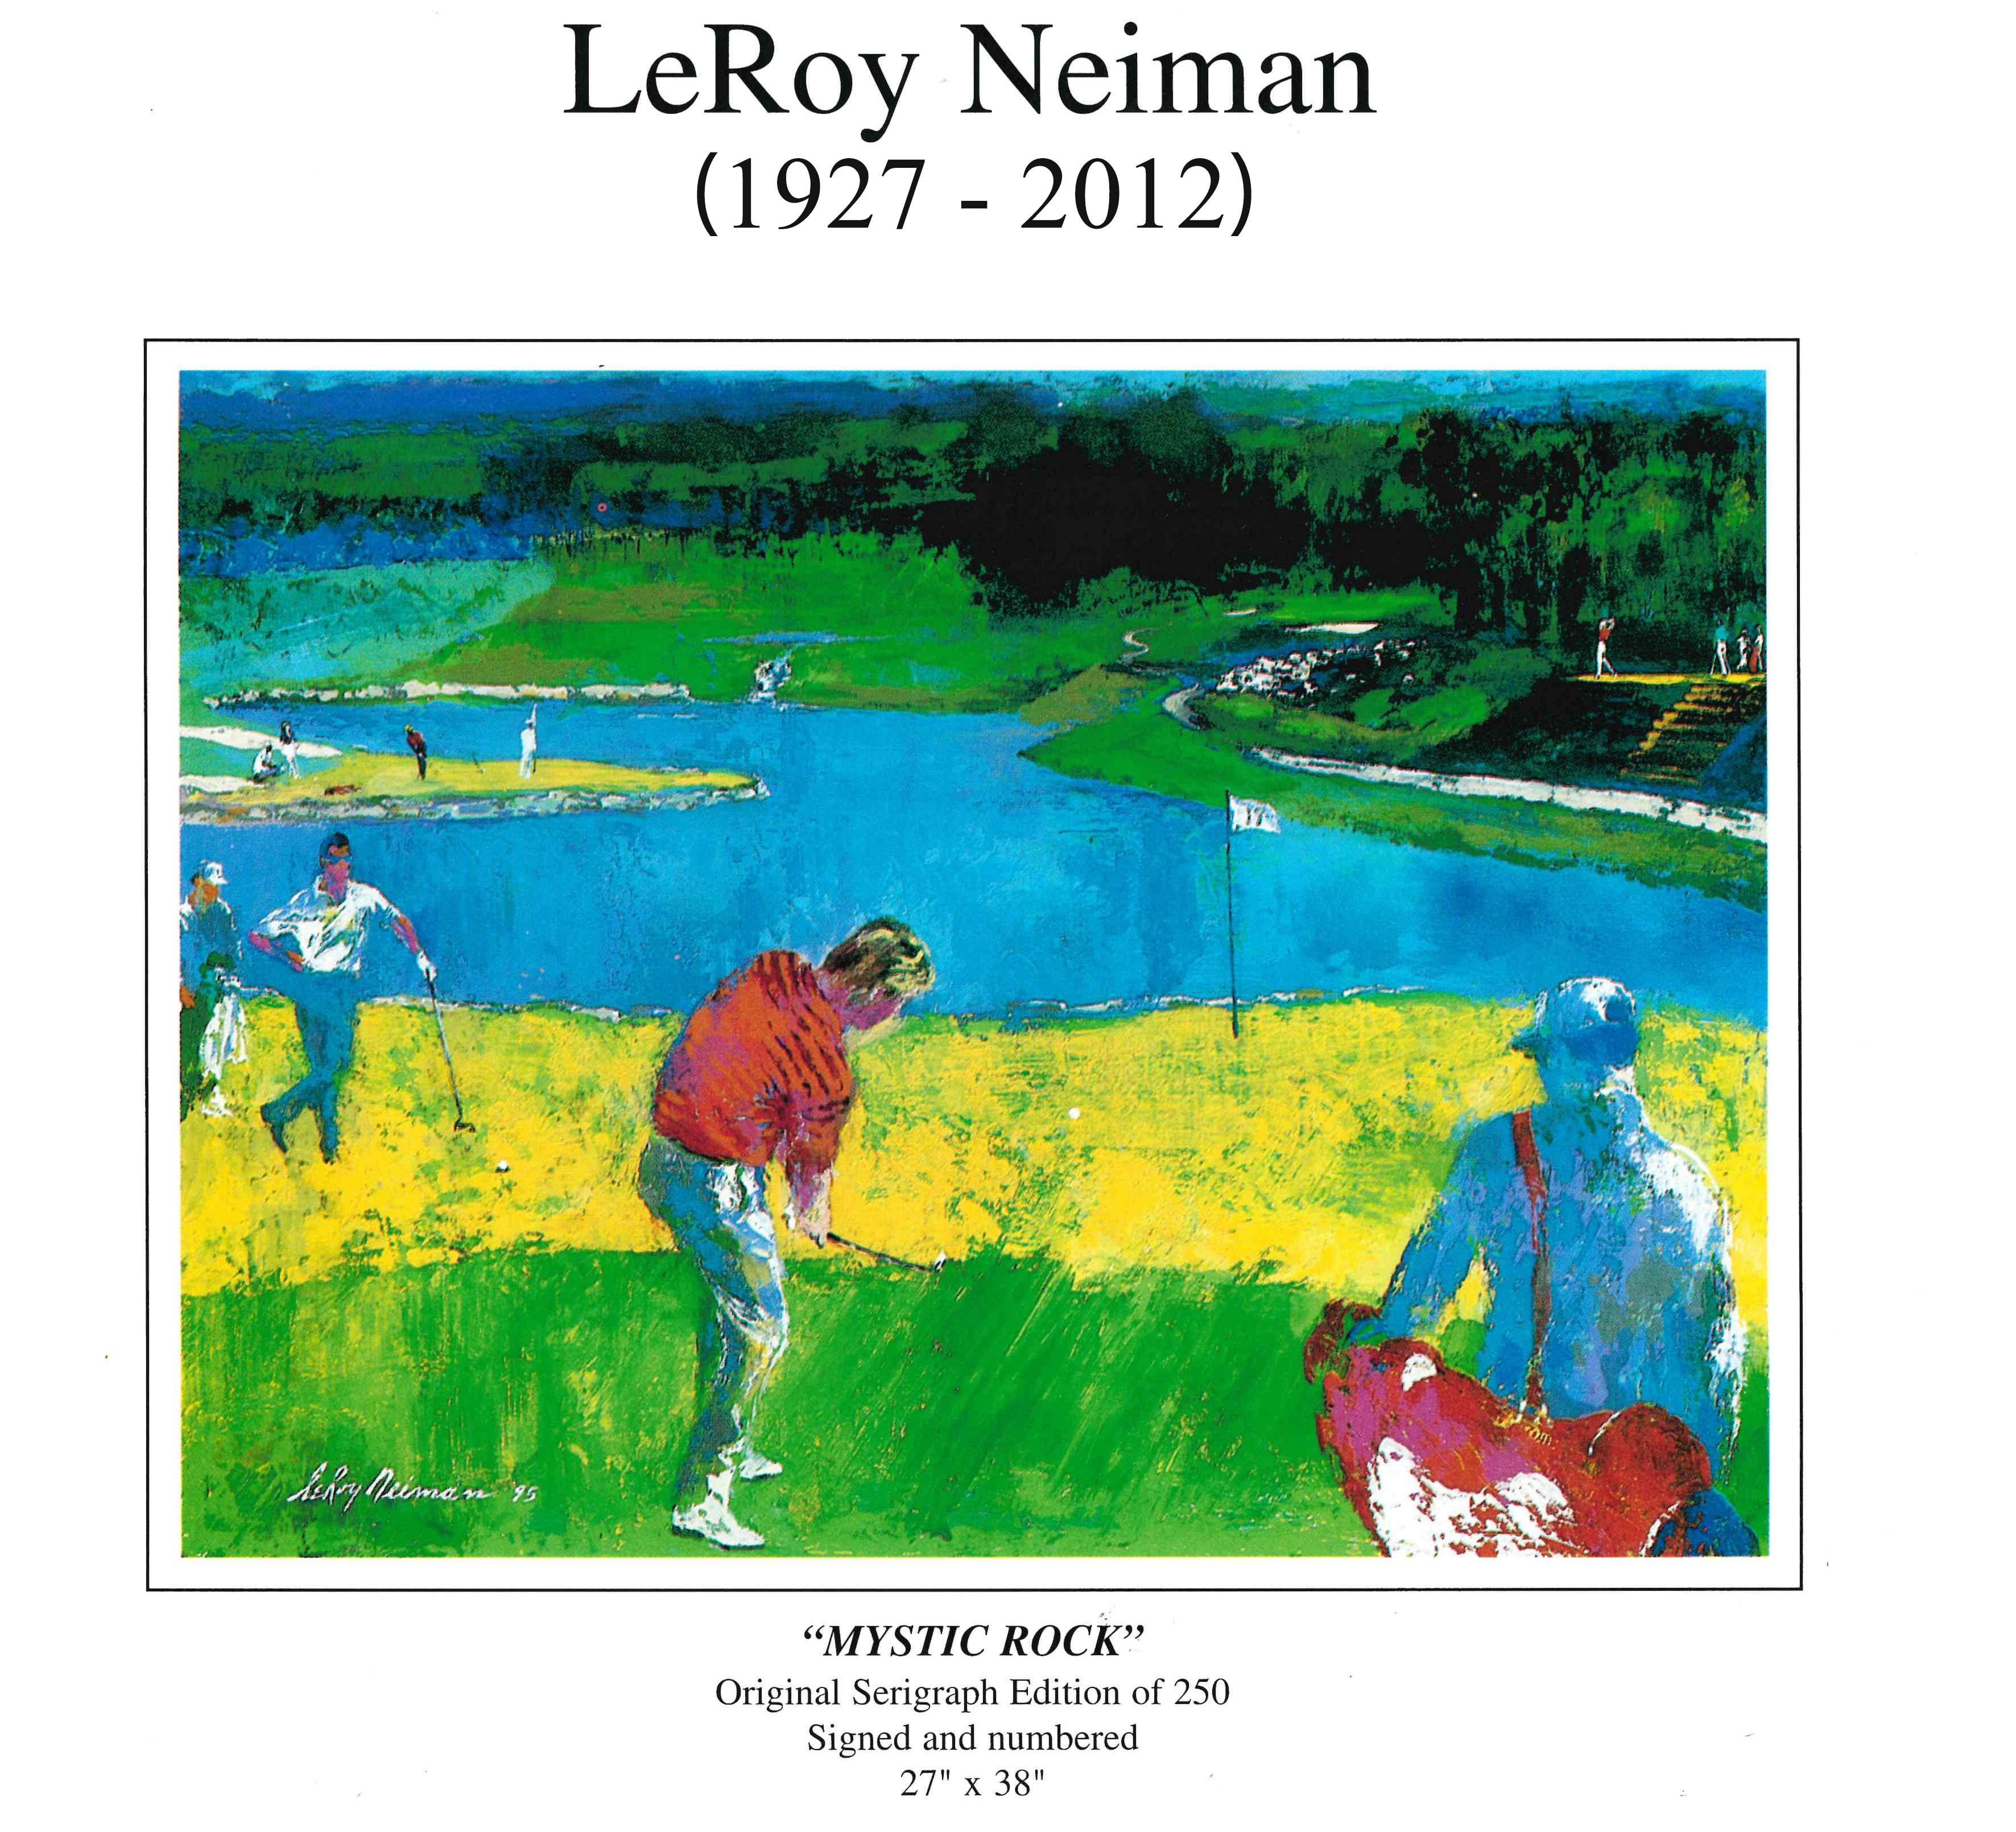 Mystic Rock - Limited Edition - Hand signed and numbered by LeRoy Neiman - Print by Leroy Neiman